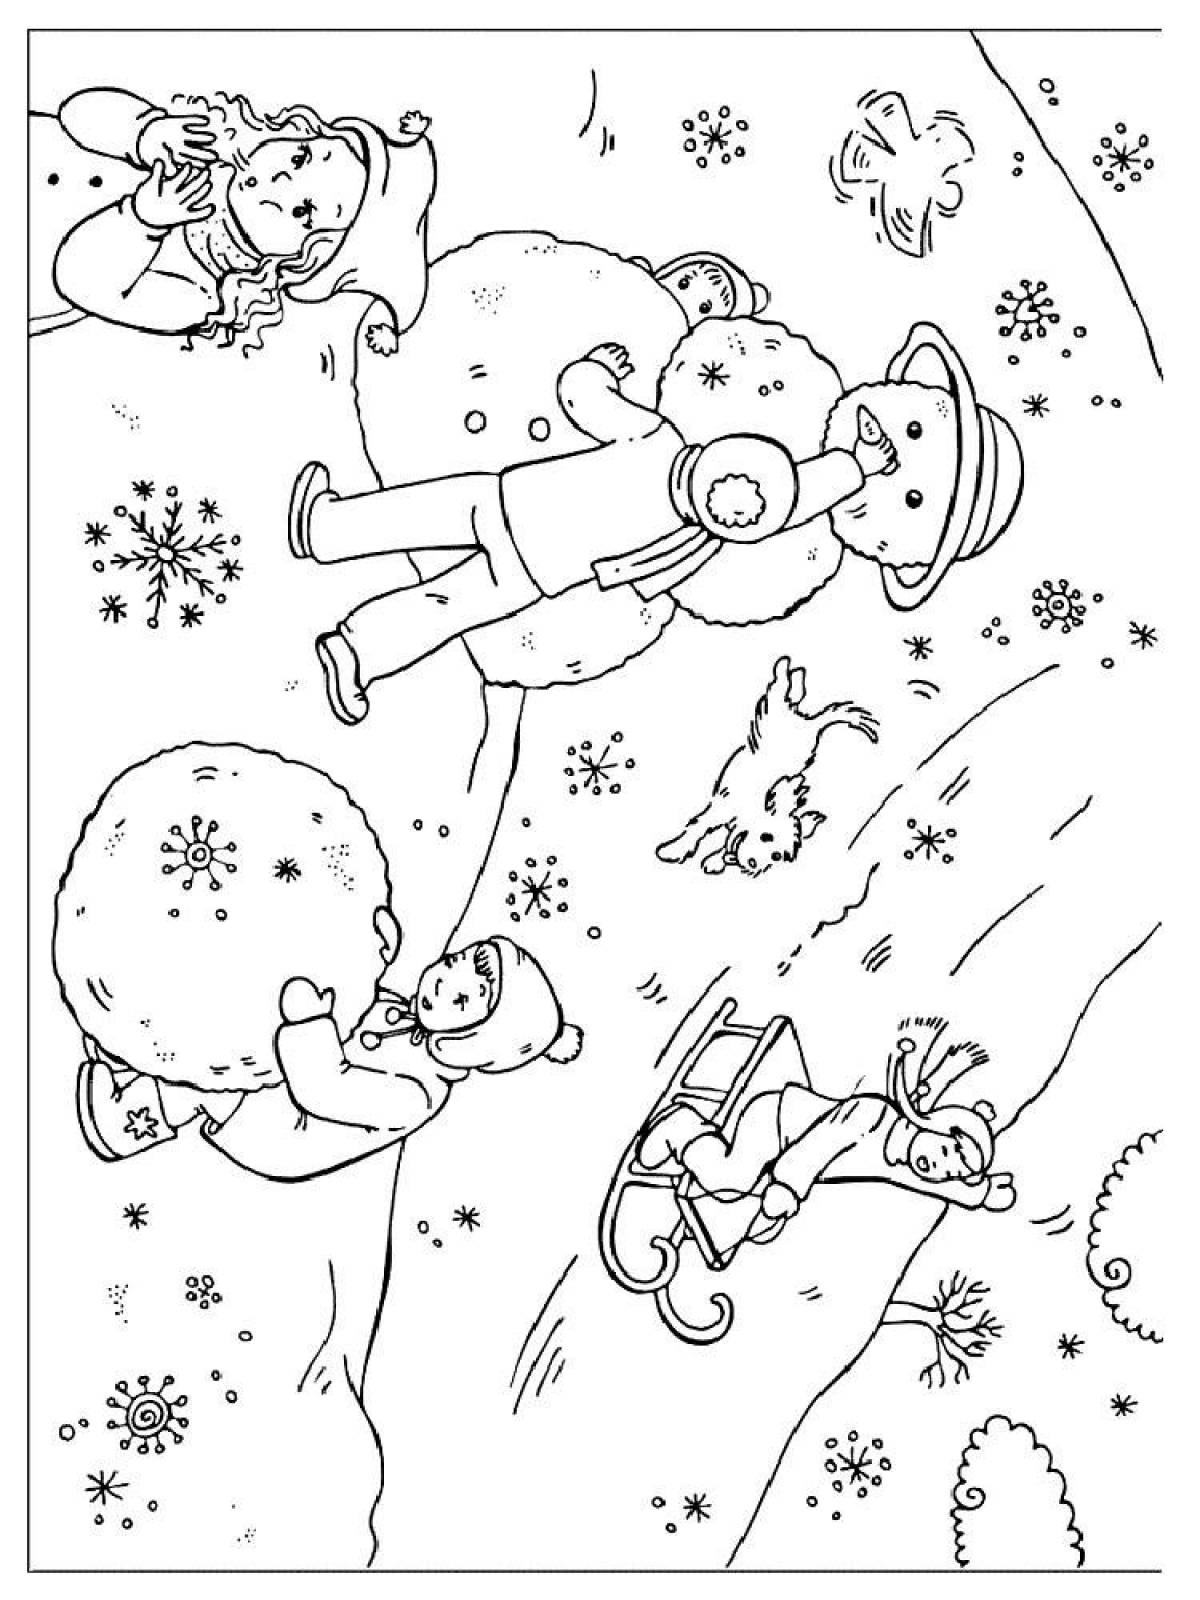 Fascinating coloring book for children winter fun 5-6 years old